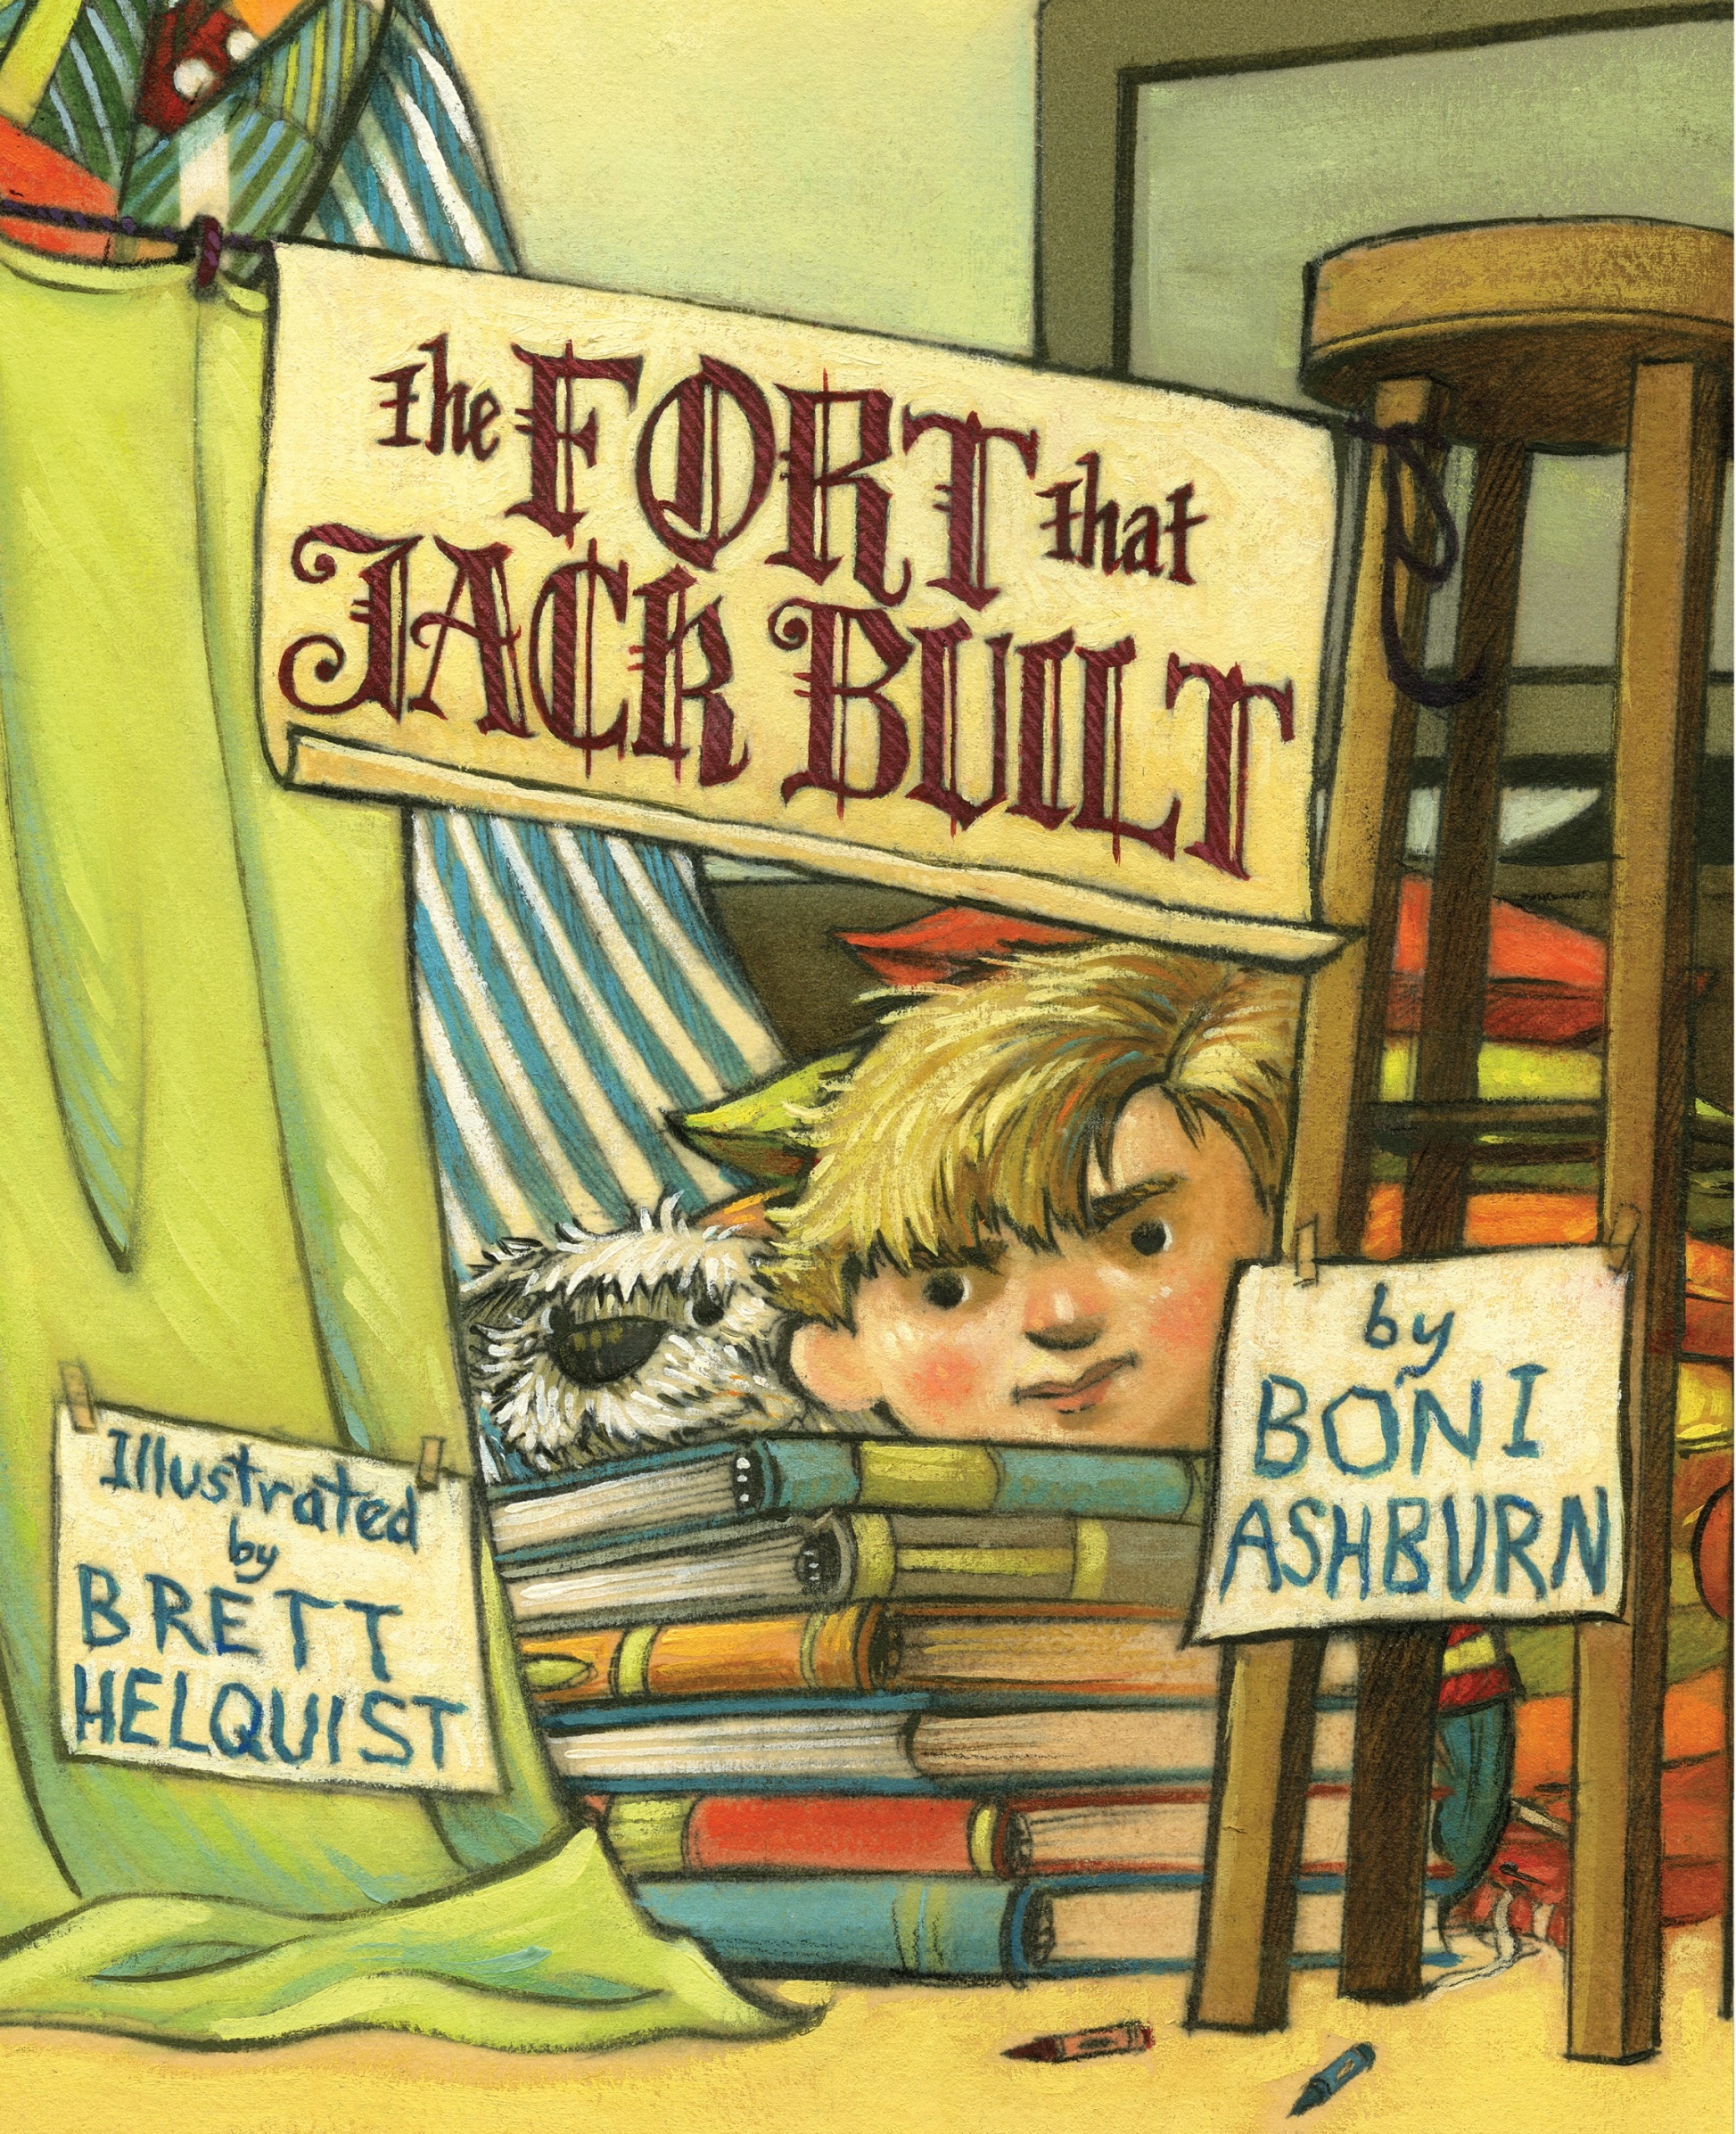 Story Time with Brett Helquist (illustrator of The Fort That Jack Built)